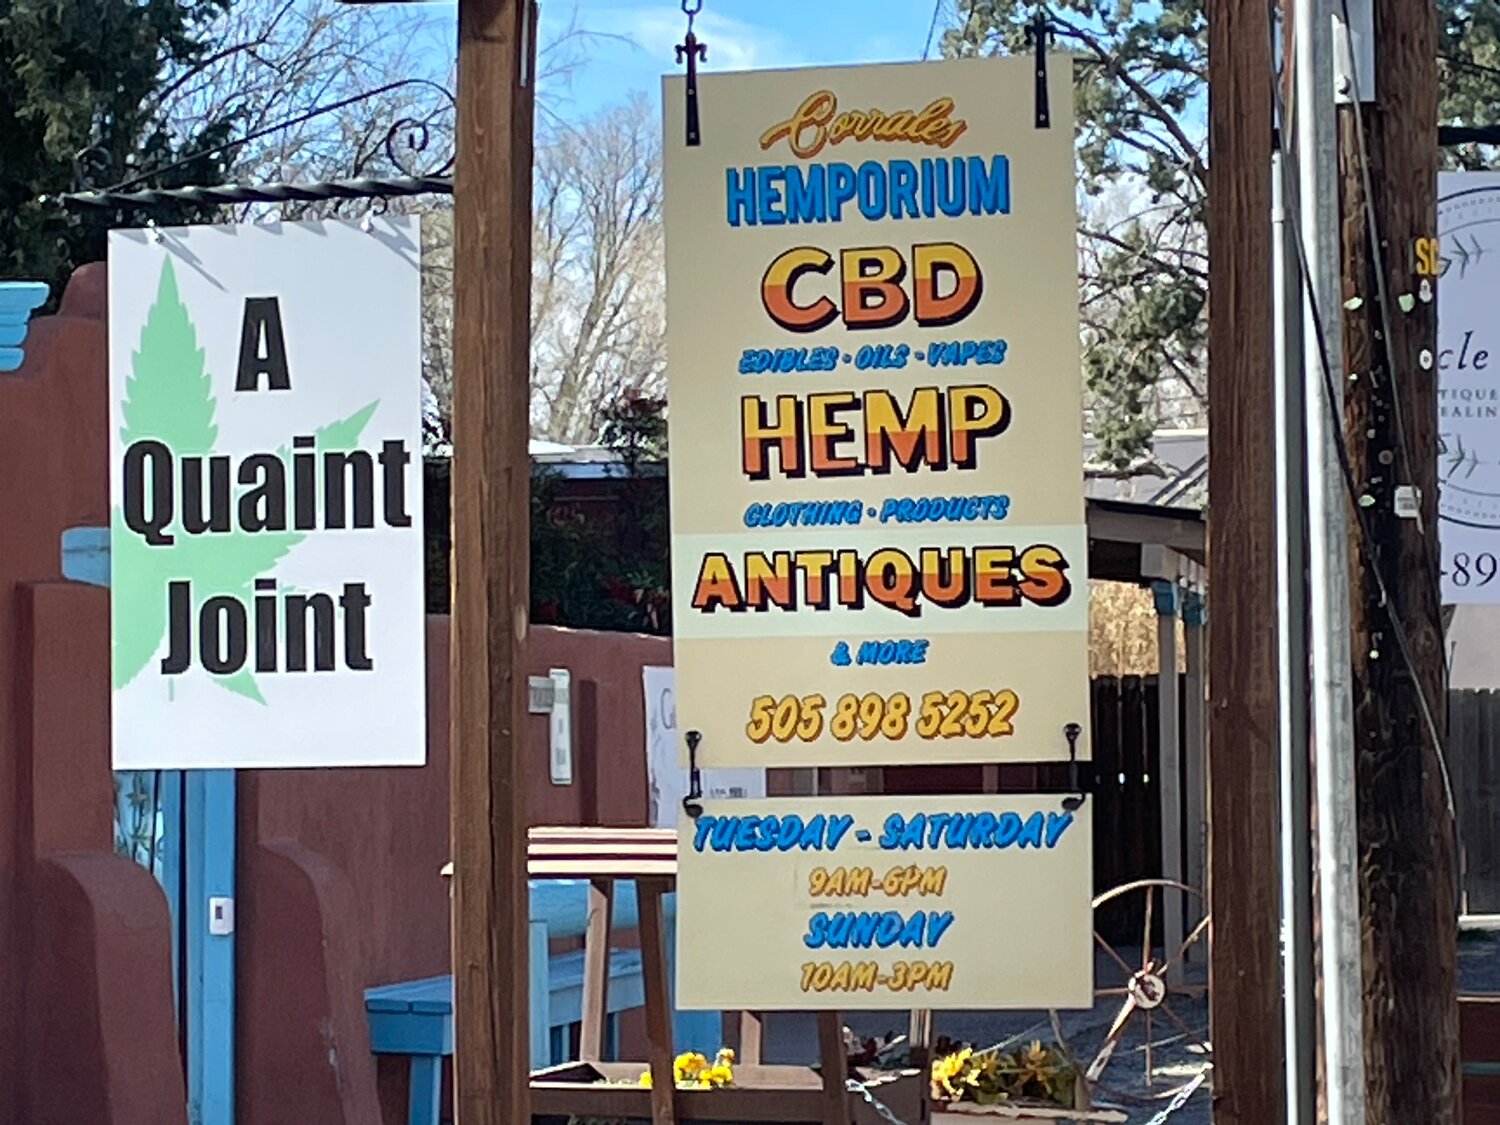 Corrales dispensary Hemporium opened as a hemp and CBD store before retail sales of recreational cannabis became legal in New Mexico.